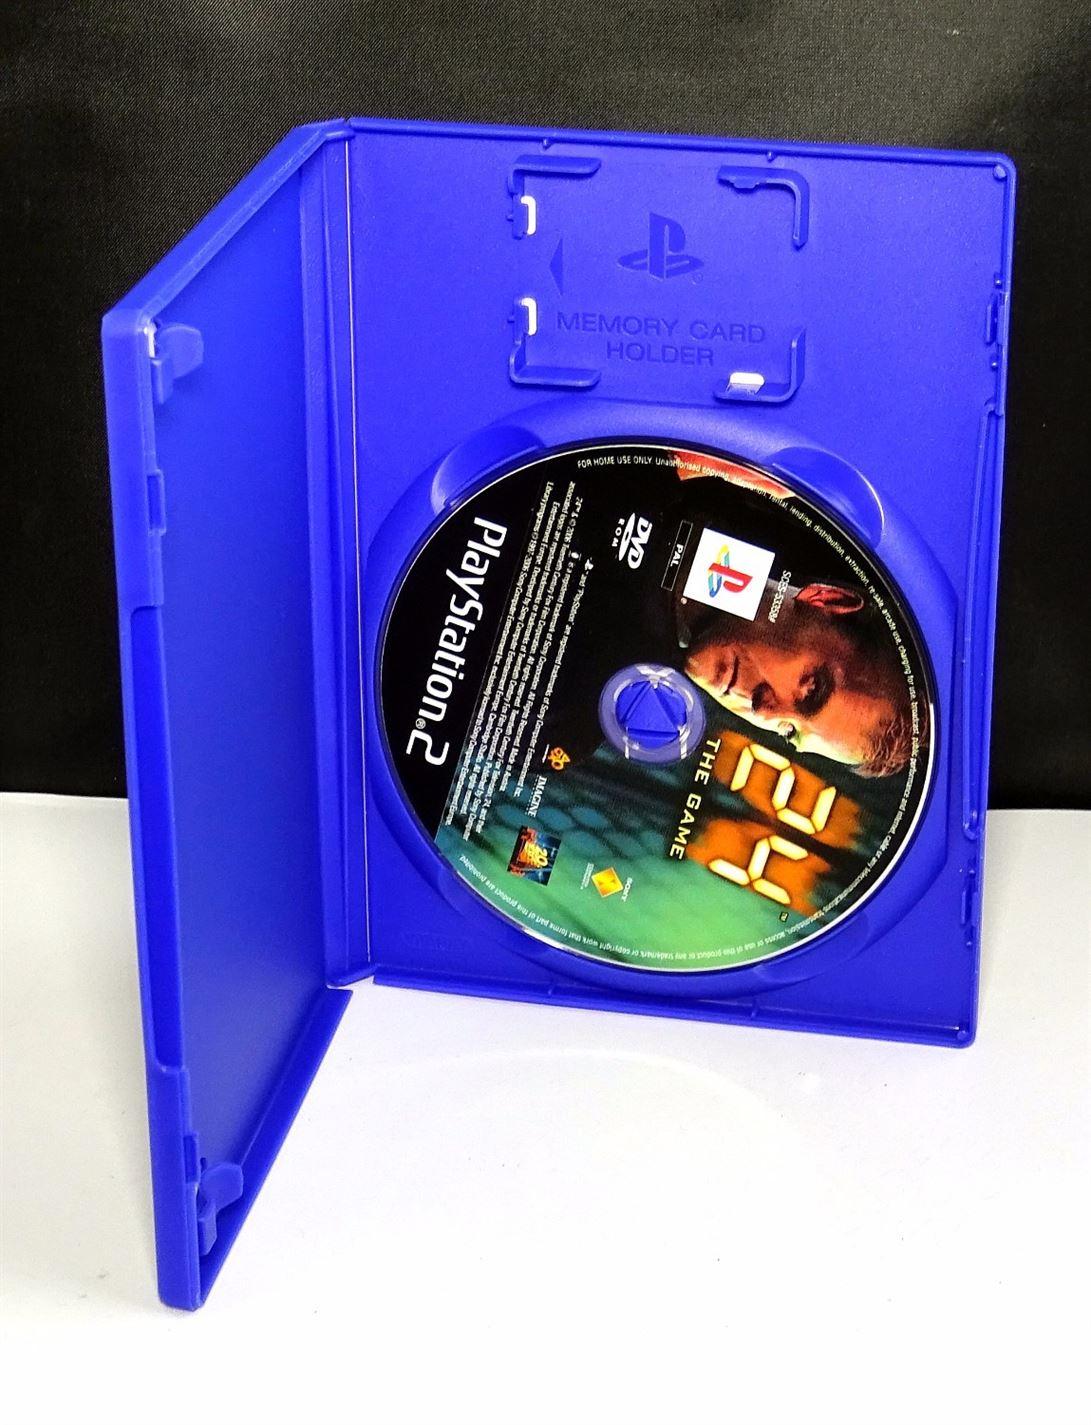 24 The Game PS2 (PlayStation 2) - UK Seller